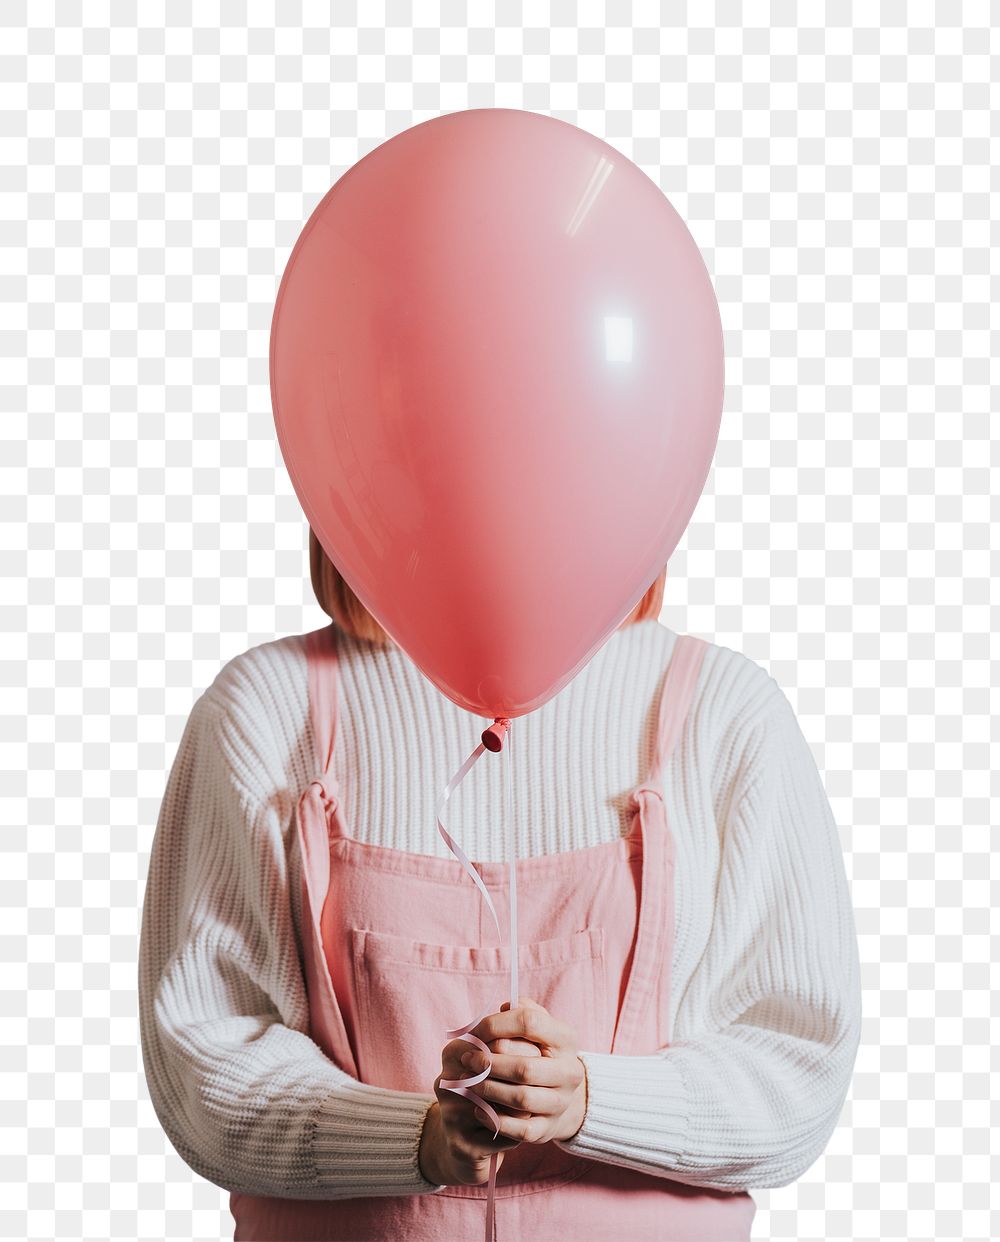 Woman with a single balloon